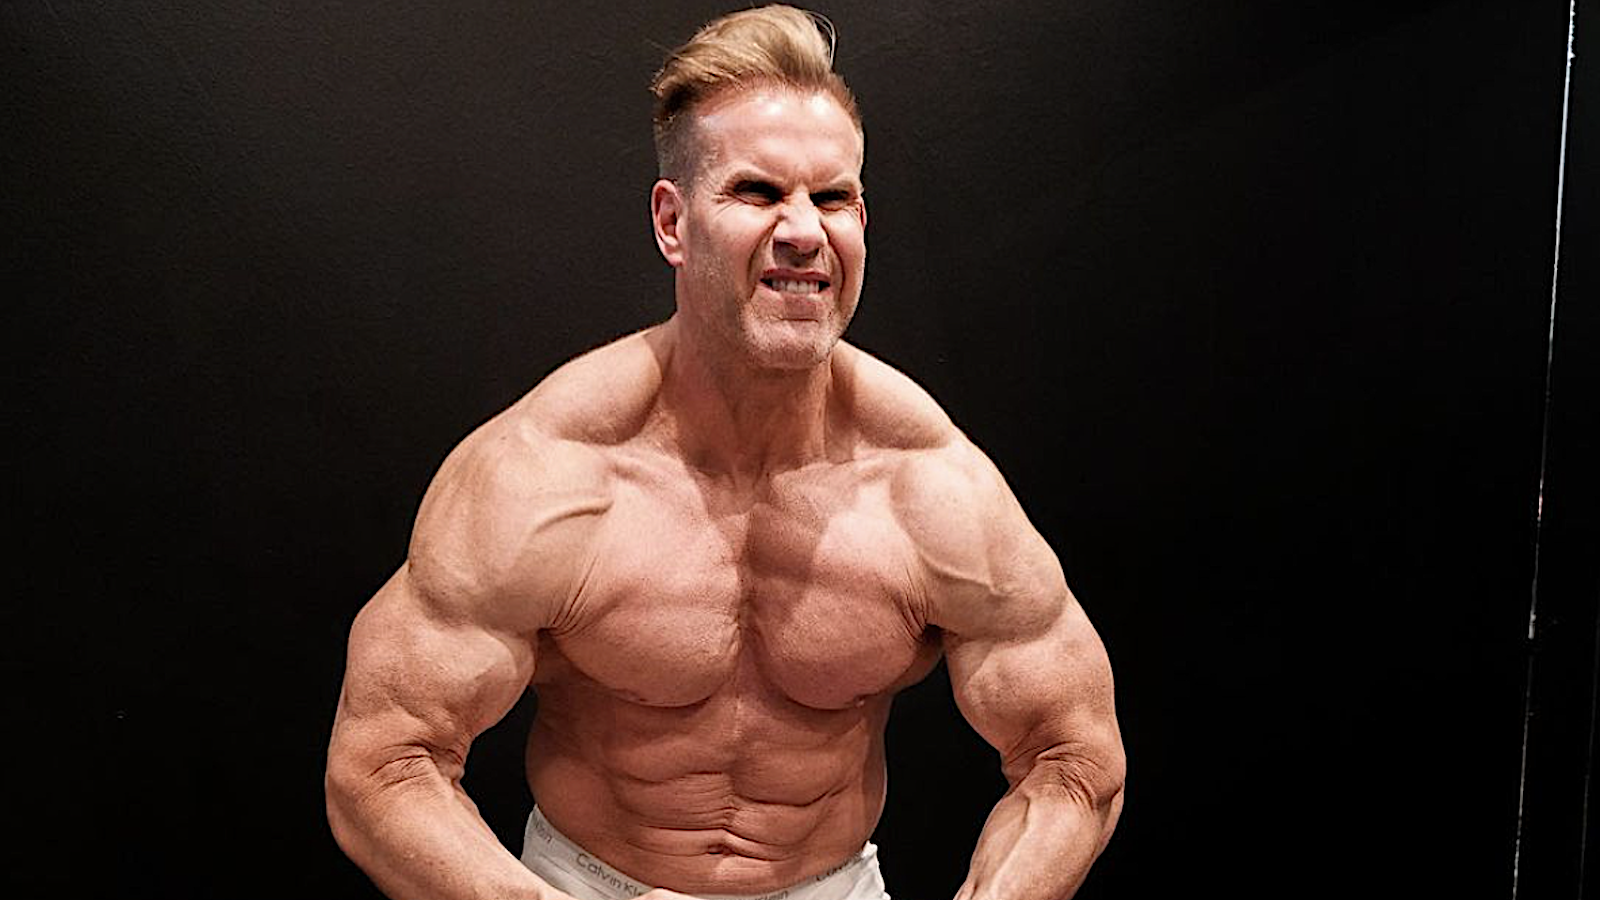 Jay Cutler Shares Up to date Physique Photograph Earlier than His “Match for 50” Transformation